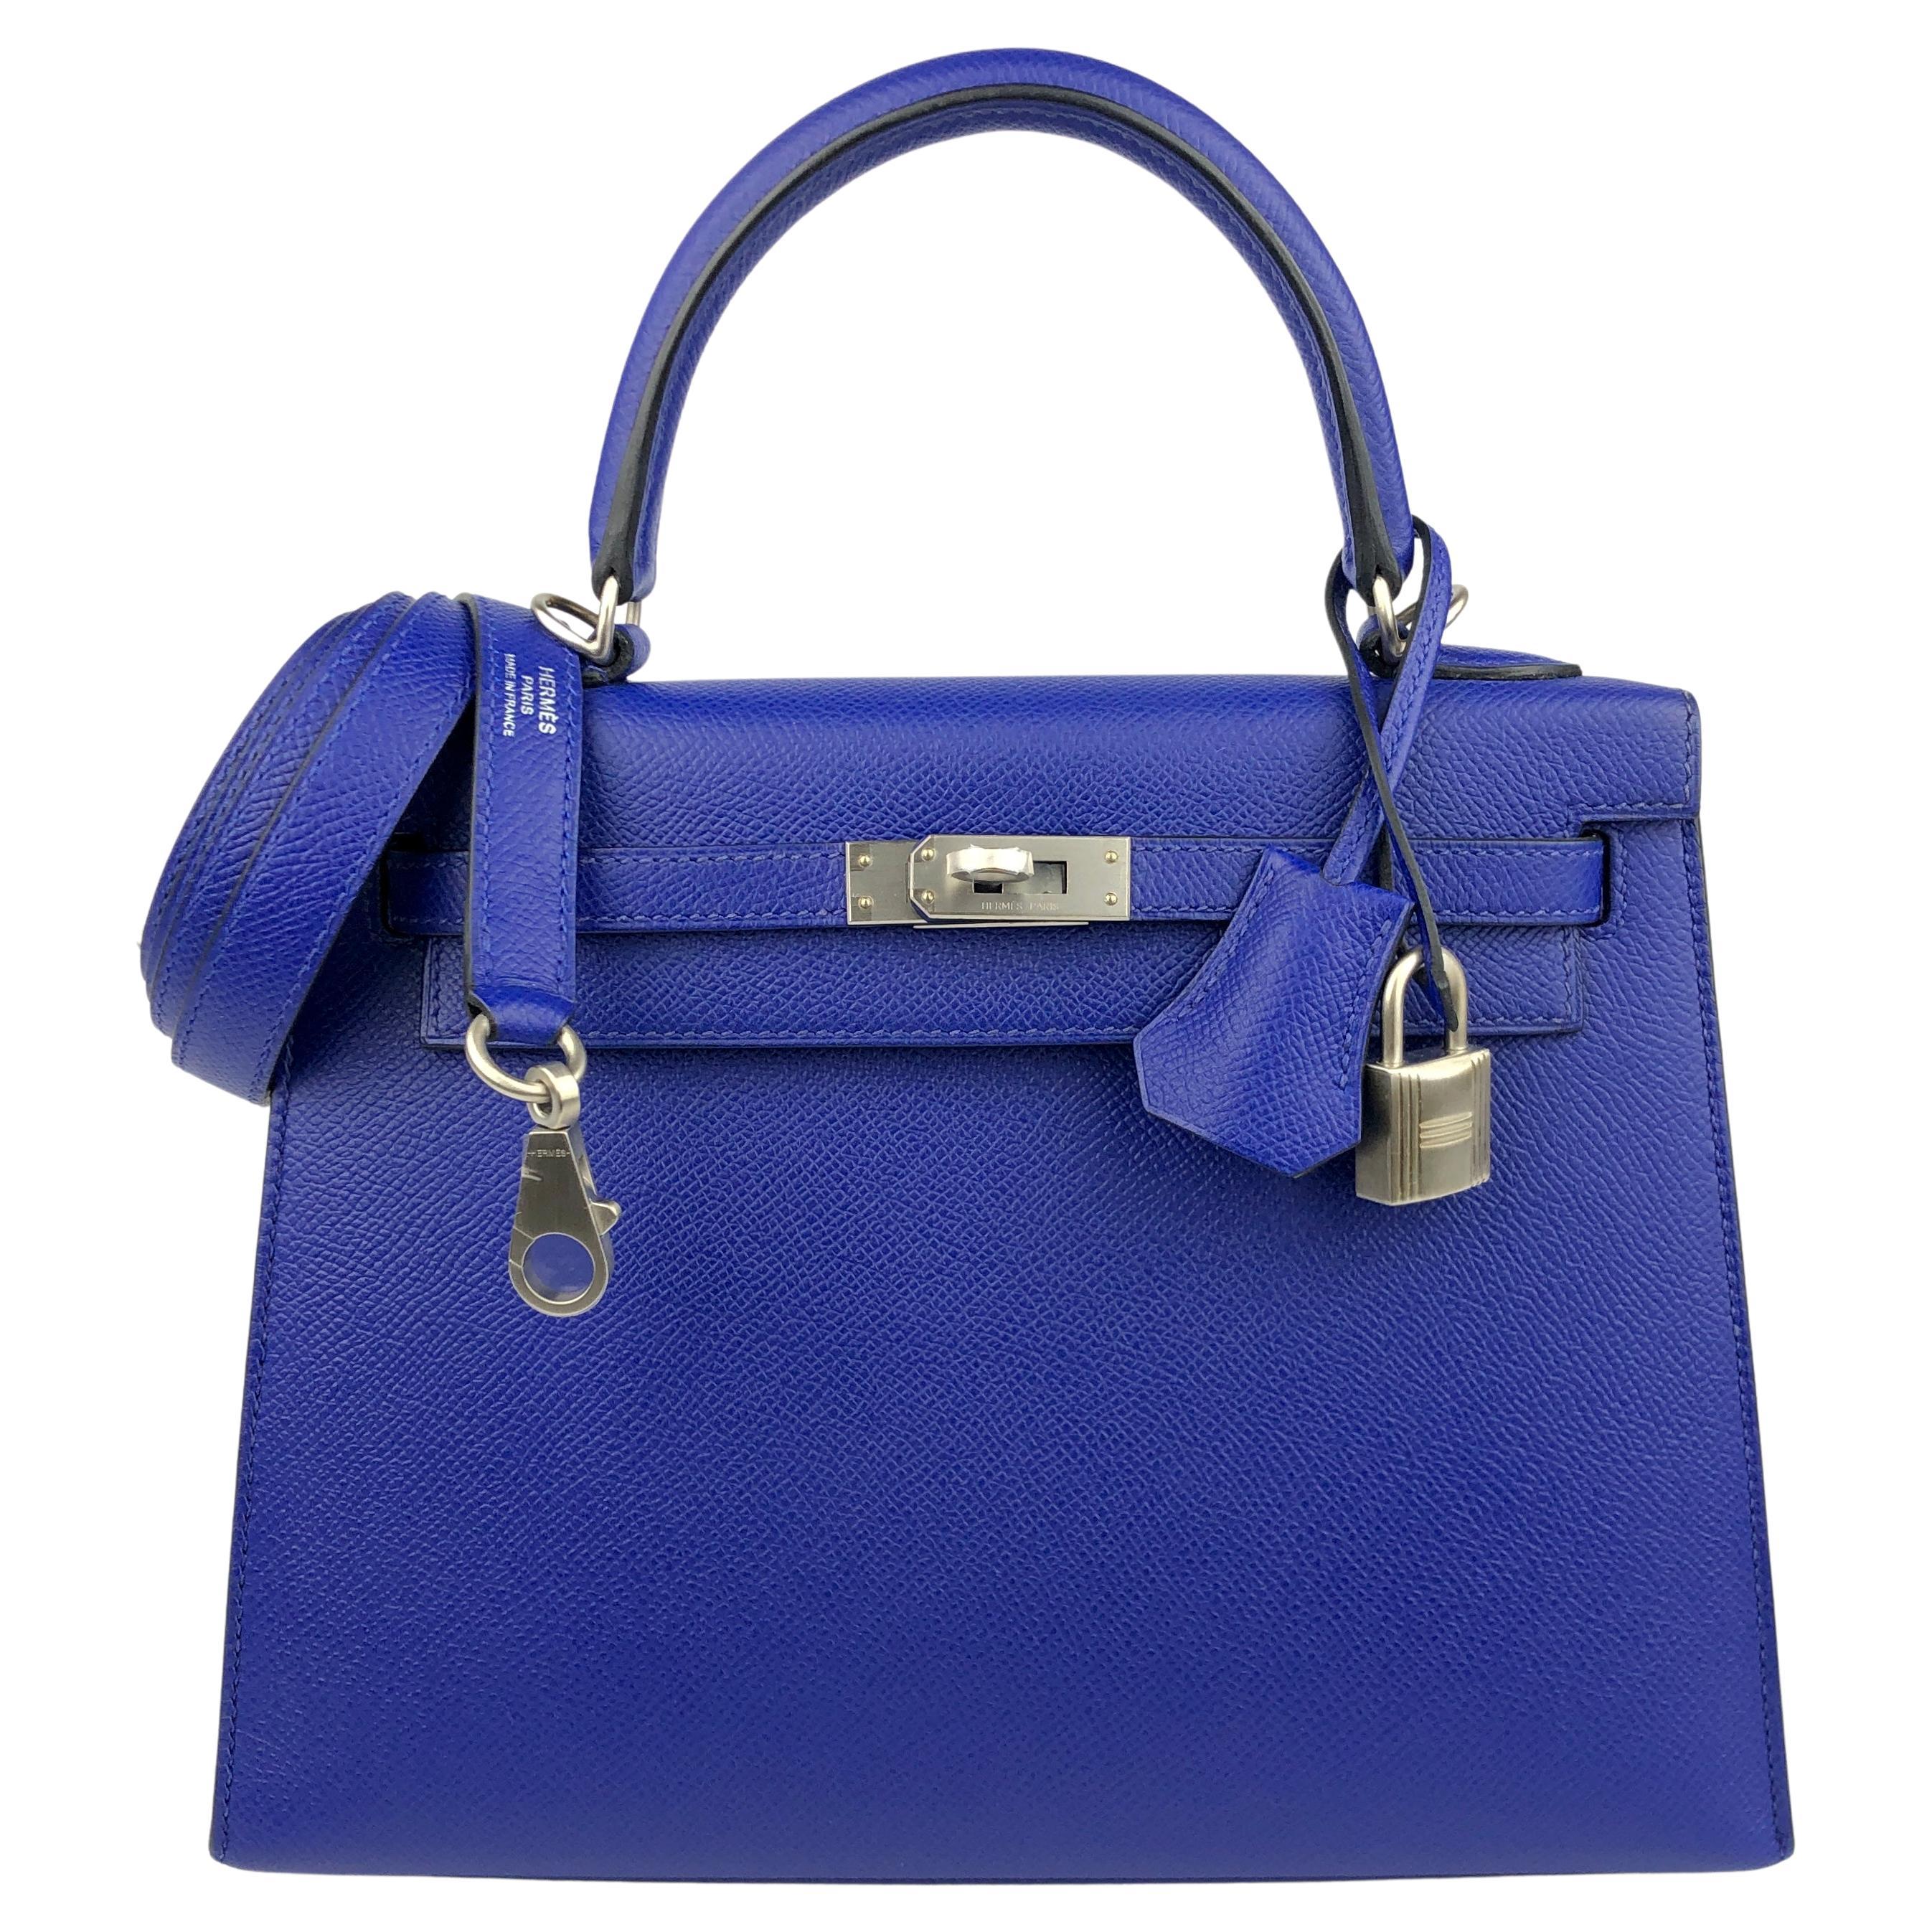 Hermès Mini Kelly Sellier 20 Top Handle Bag In Bleu Du Nord Epsom Leather With Gold Hardware in Blue Womens Bags Top-handle bags 